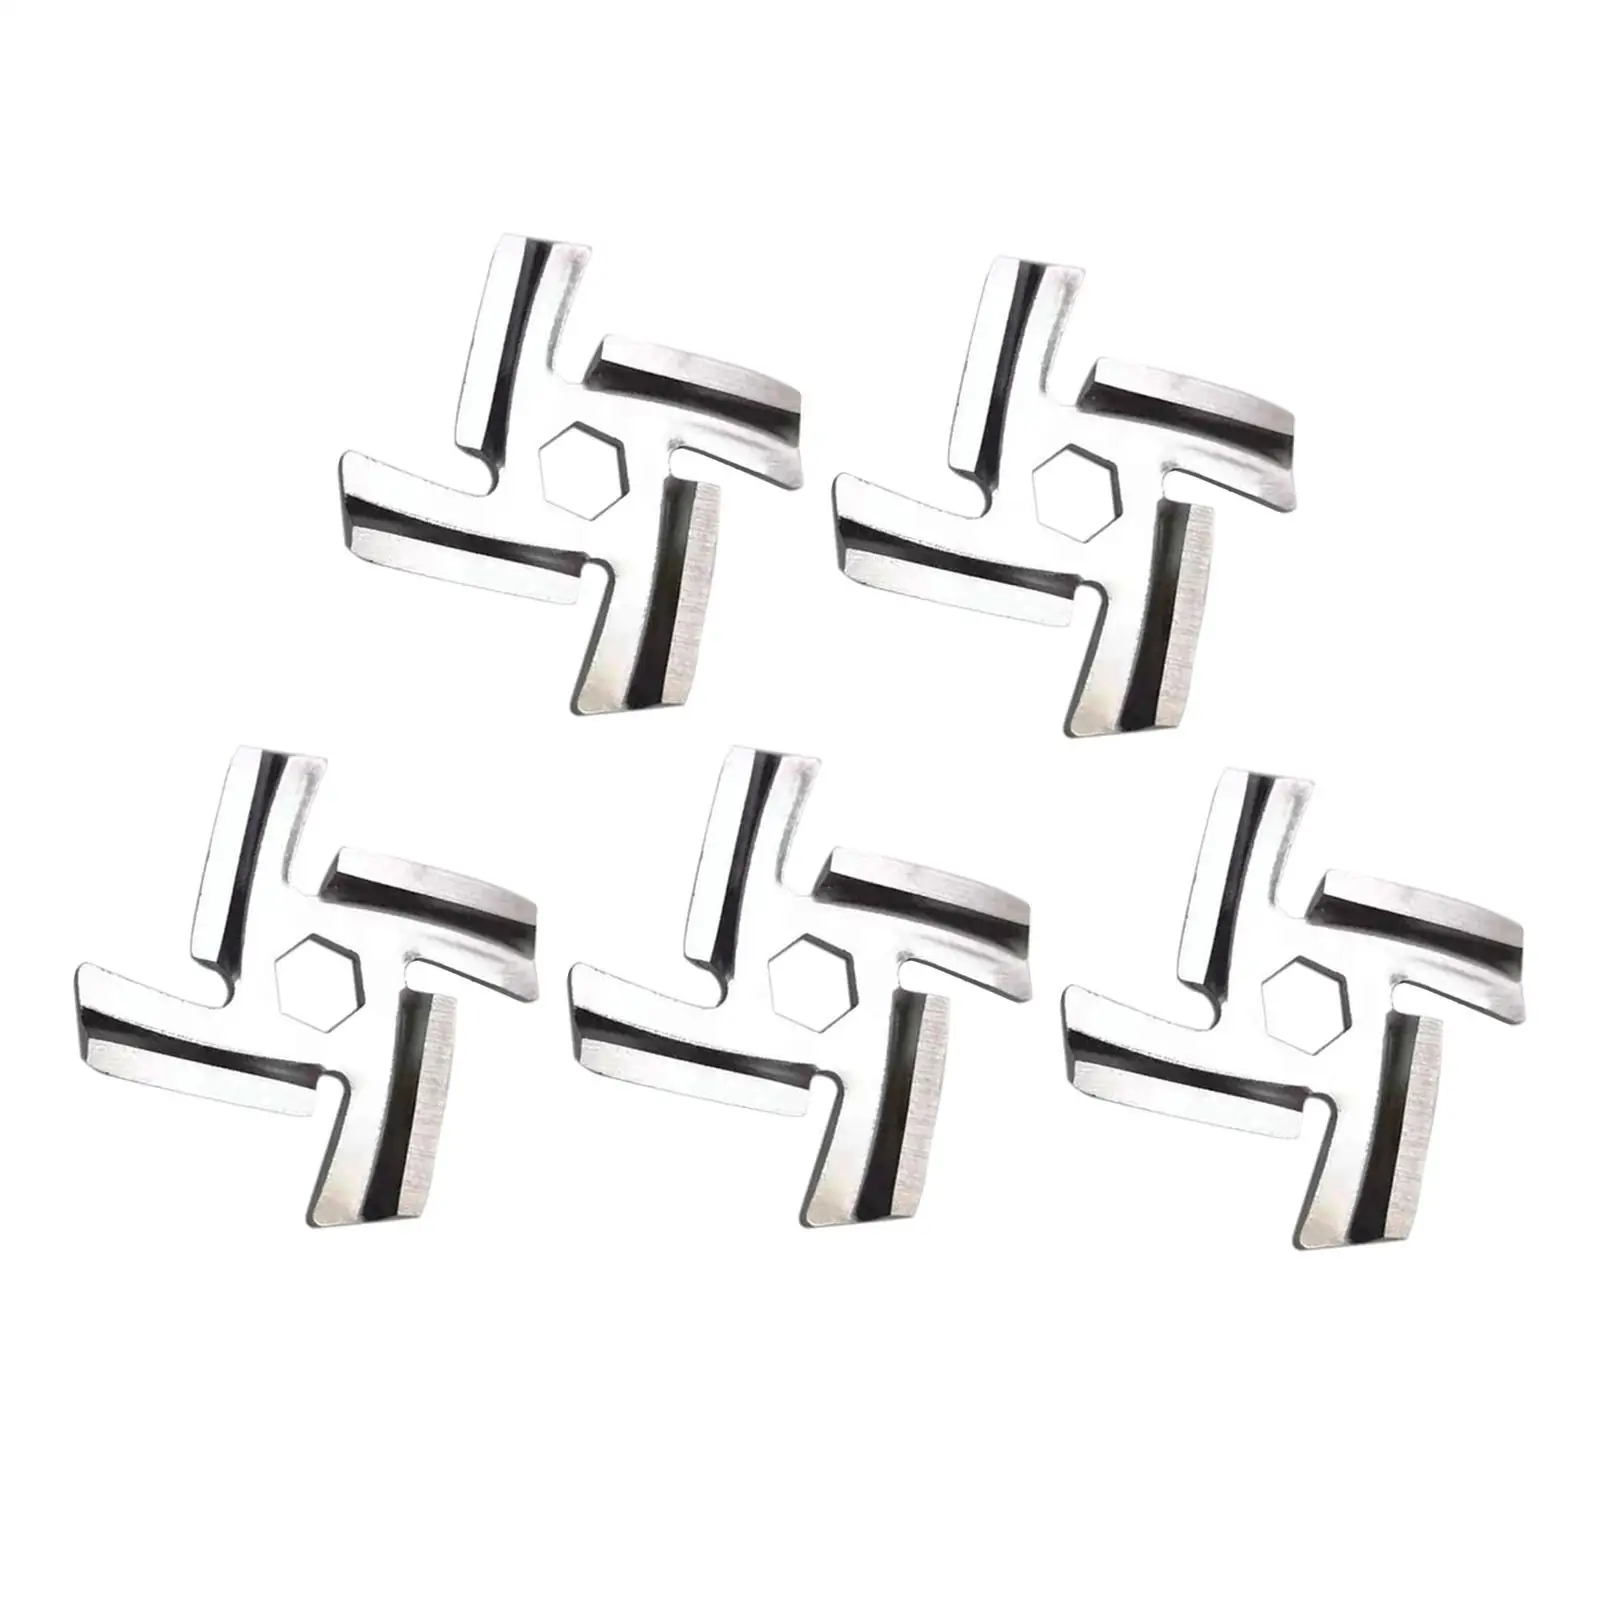 5x Meat Grinder Blade Replacement 8.3mm Parts Attachment Food Grinder Blade Cutter for Stand Mixers Meat Grinder Fits Kitchen